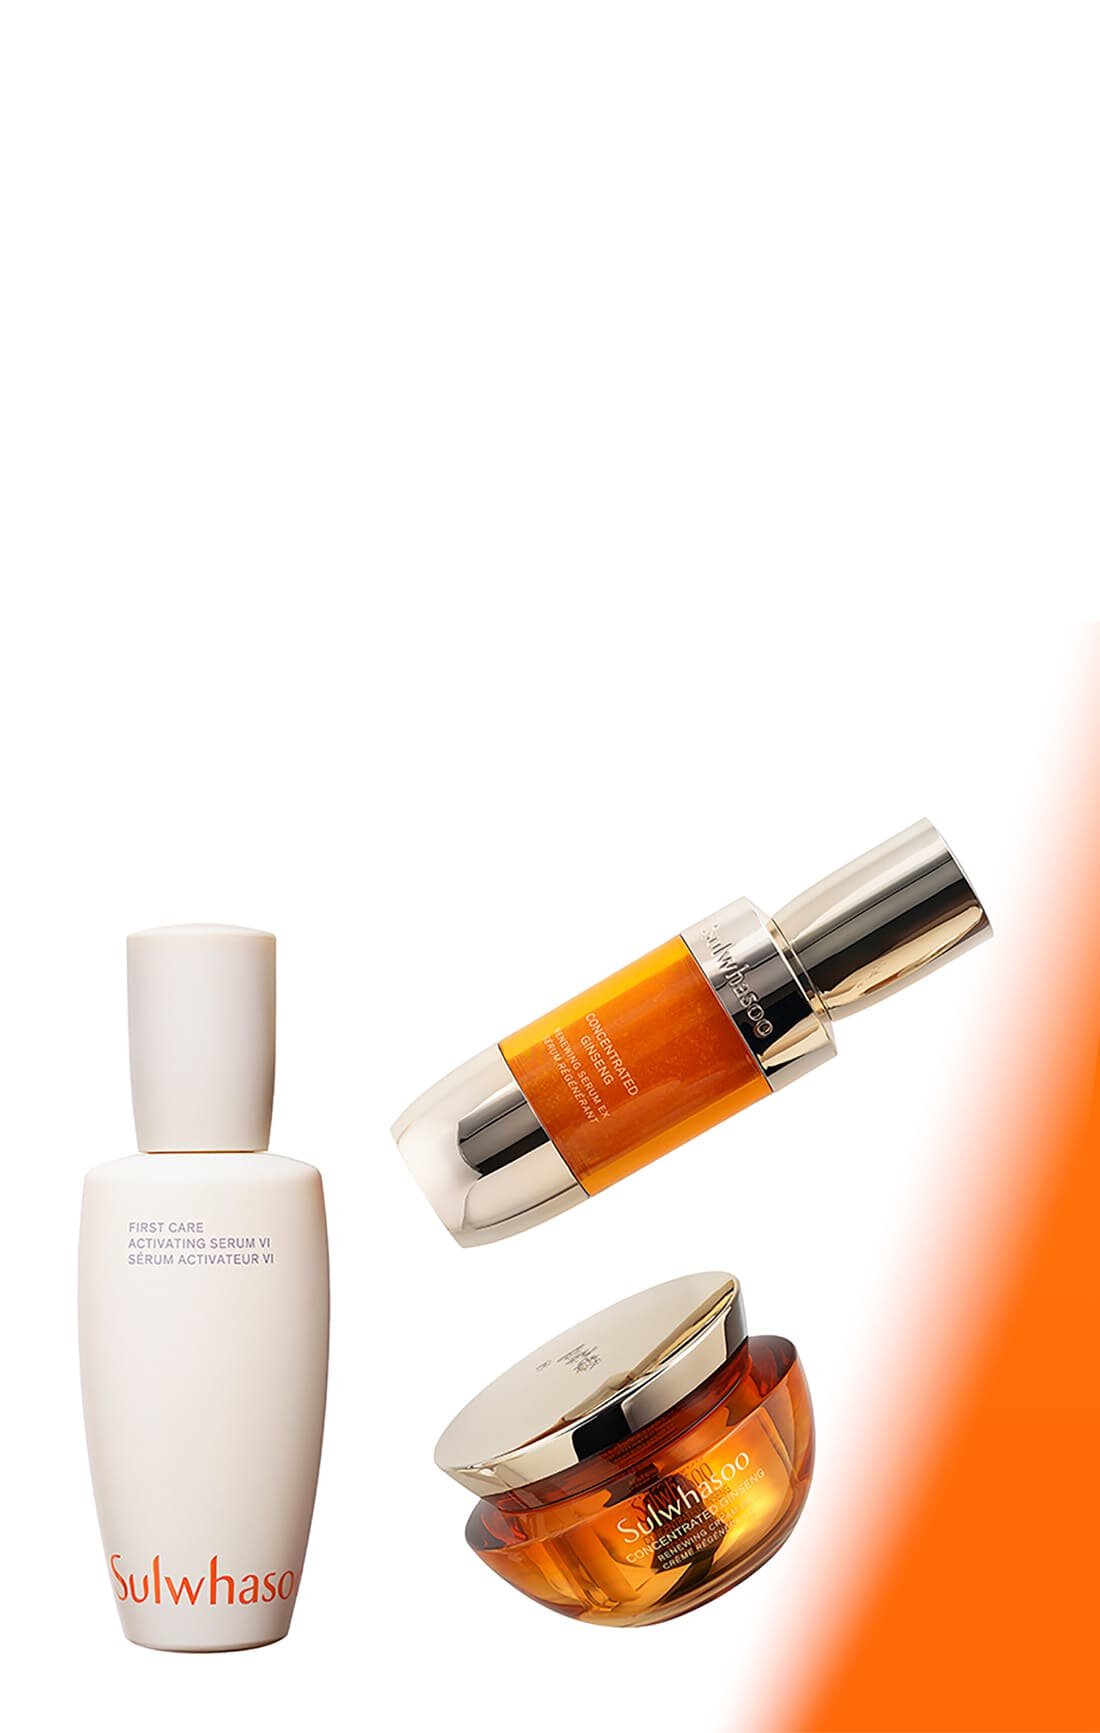 Achieve a health and radiant skin with the Sulwhasoo First Care Activating Serum. Follow it up with Concentrated ginseng renewing cream & serum. Your skin will look naturally revitalized and feel replenished